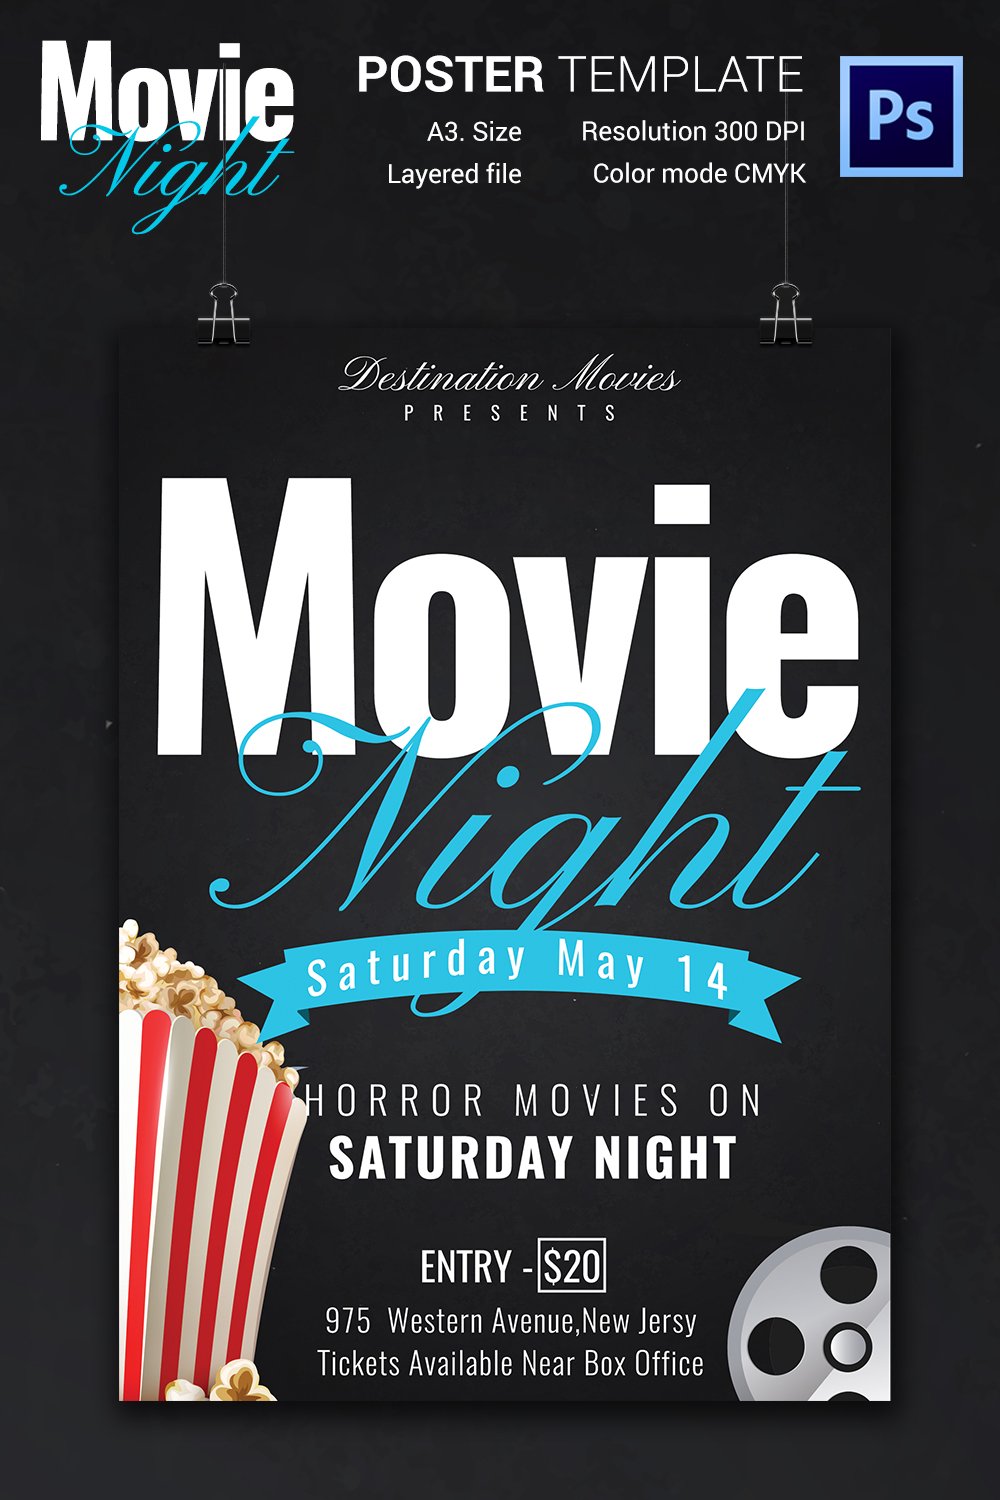 Movie Night Flyer Template 25  Free JPG PSD Format Download Free